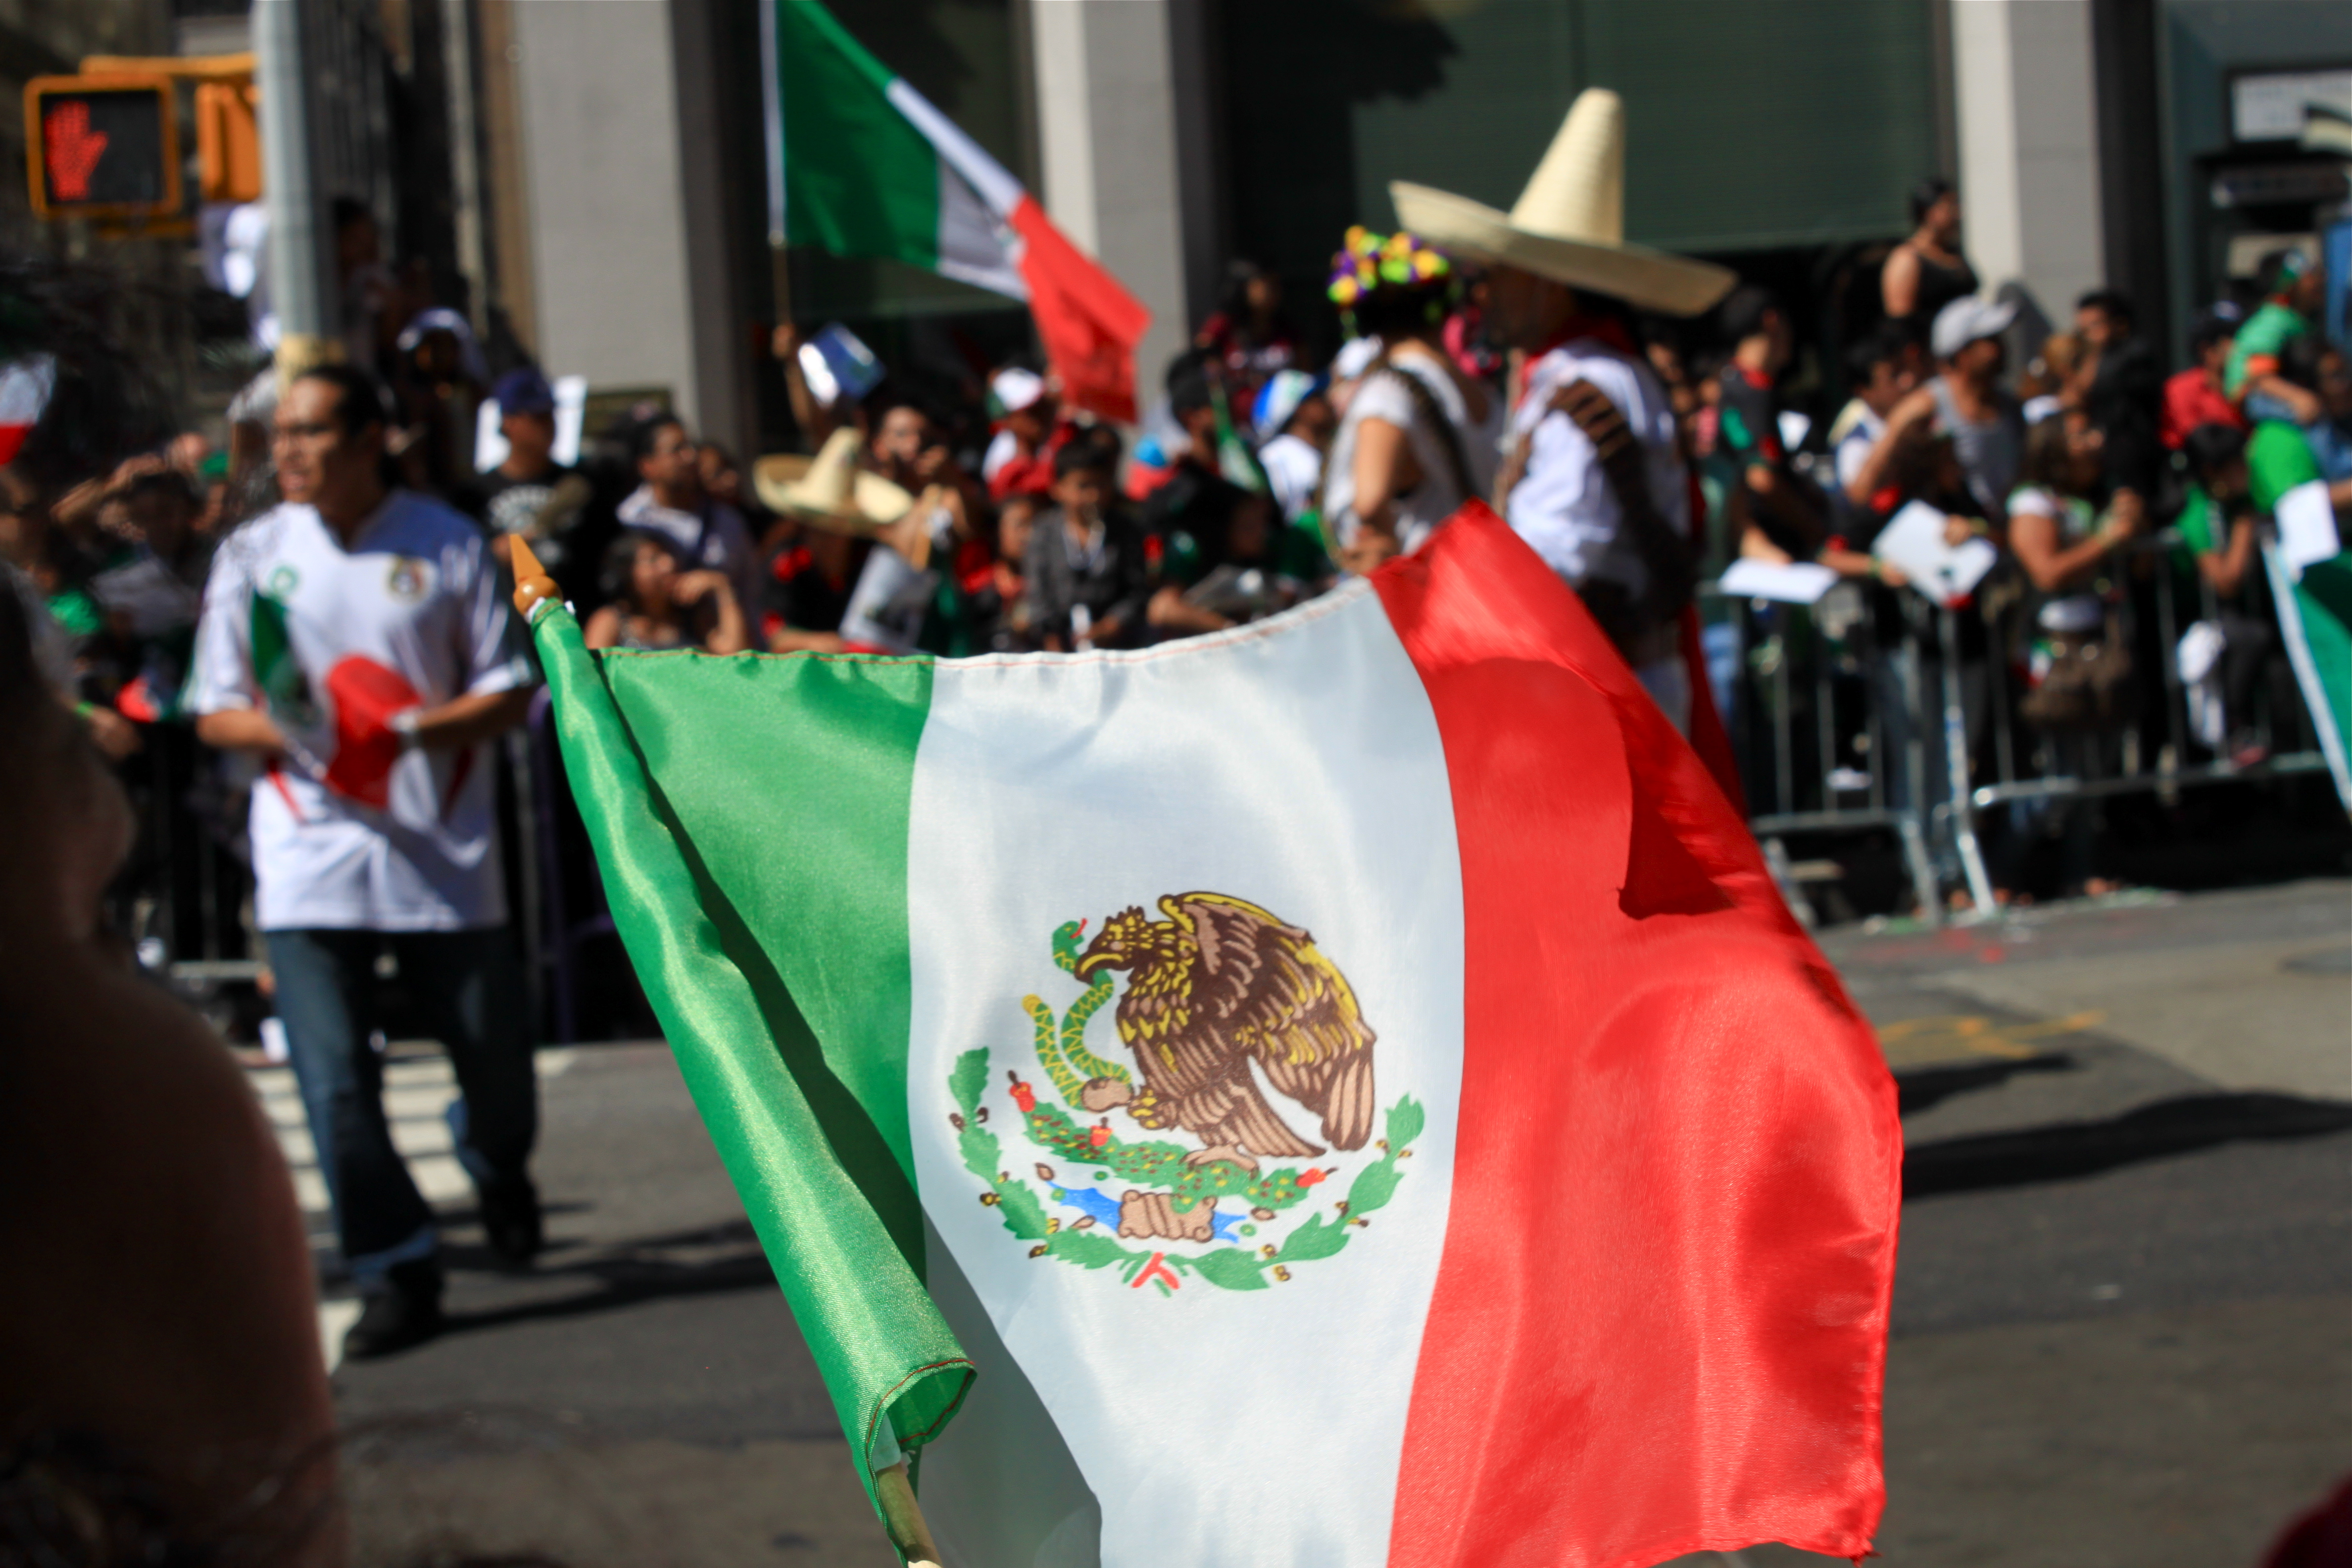 Download this The Mexican Parade Nyc Celebrates Bicentenario picture